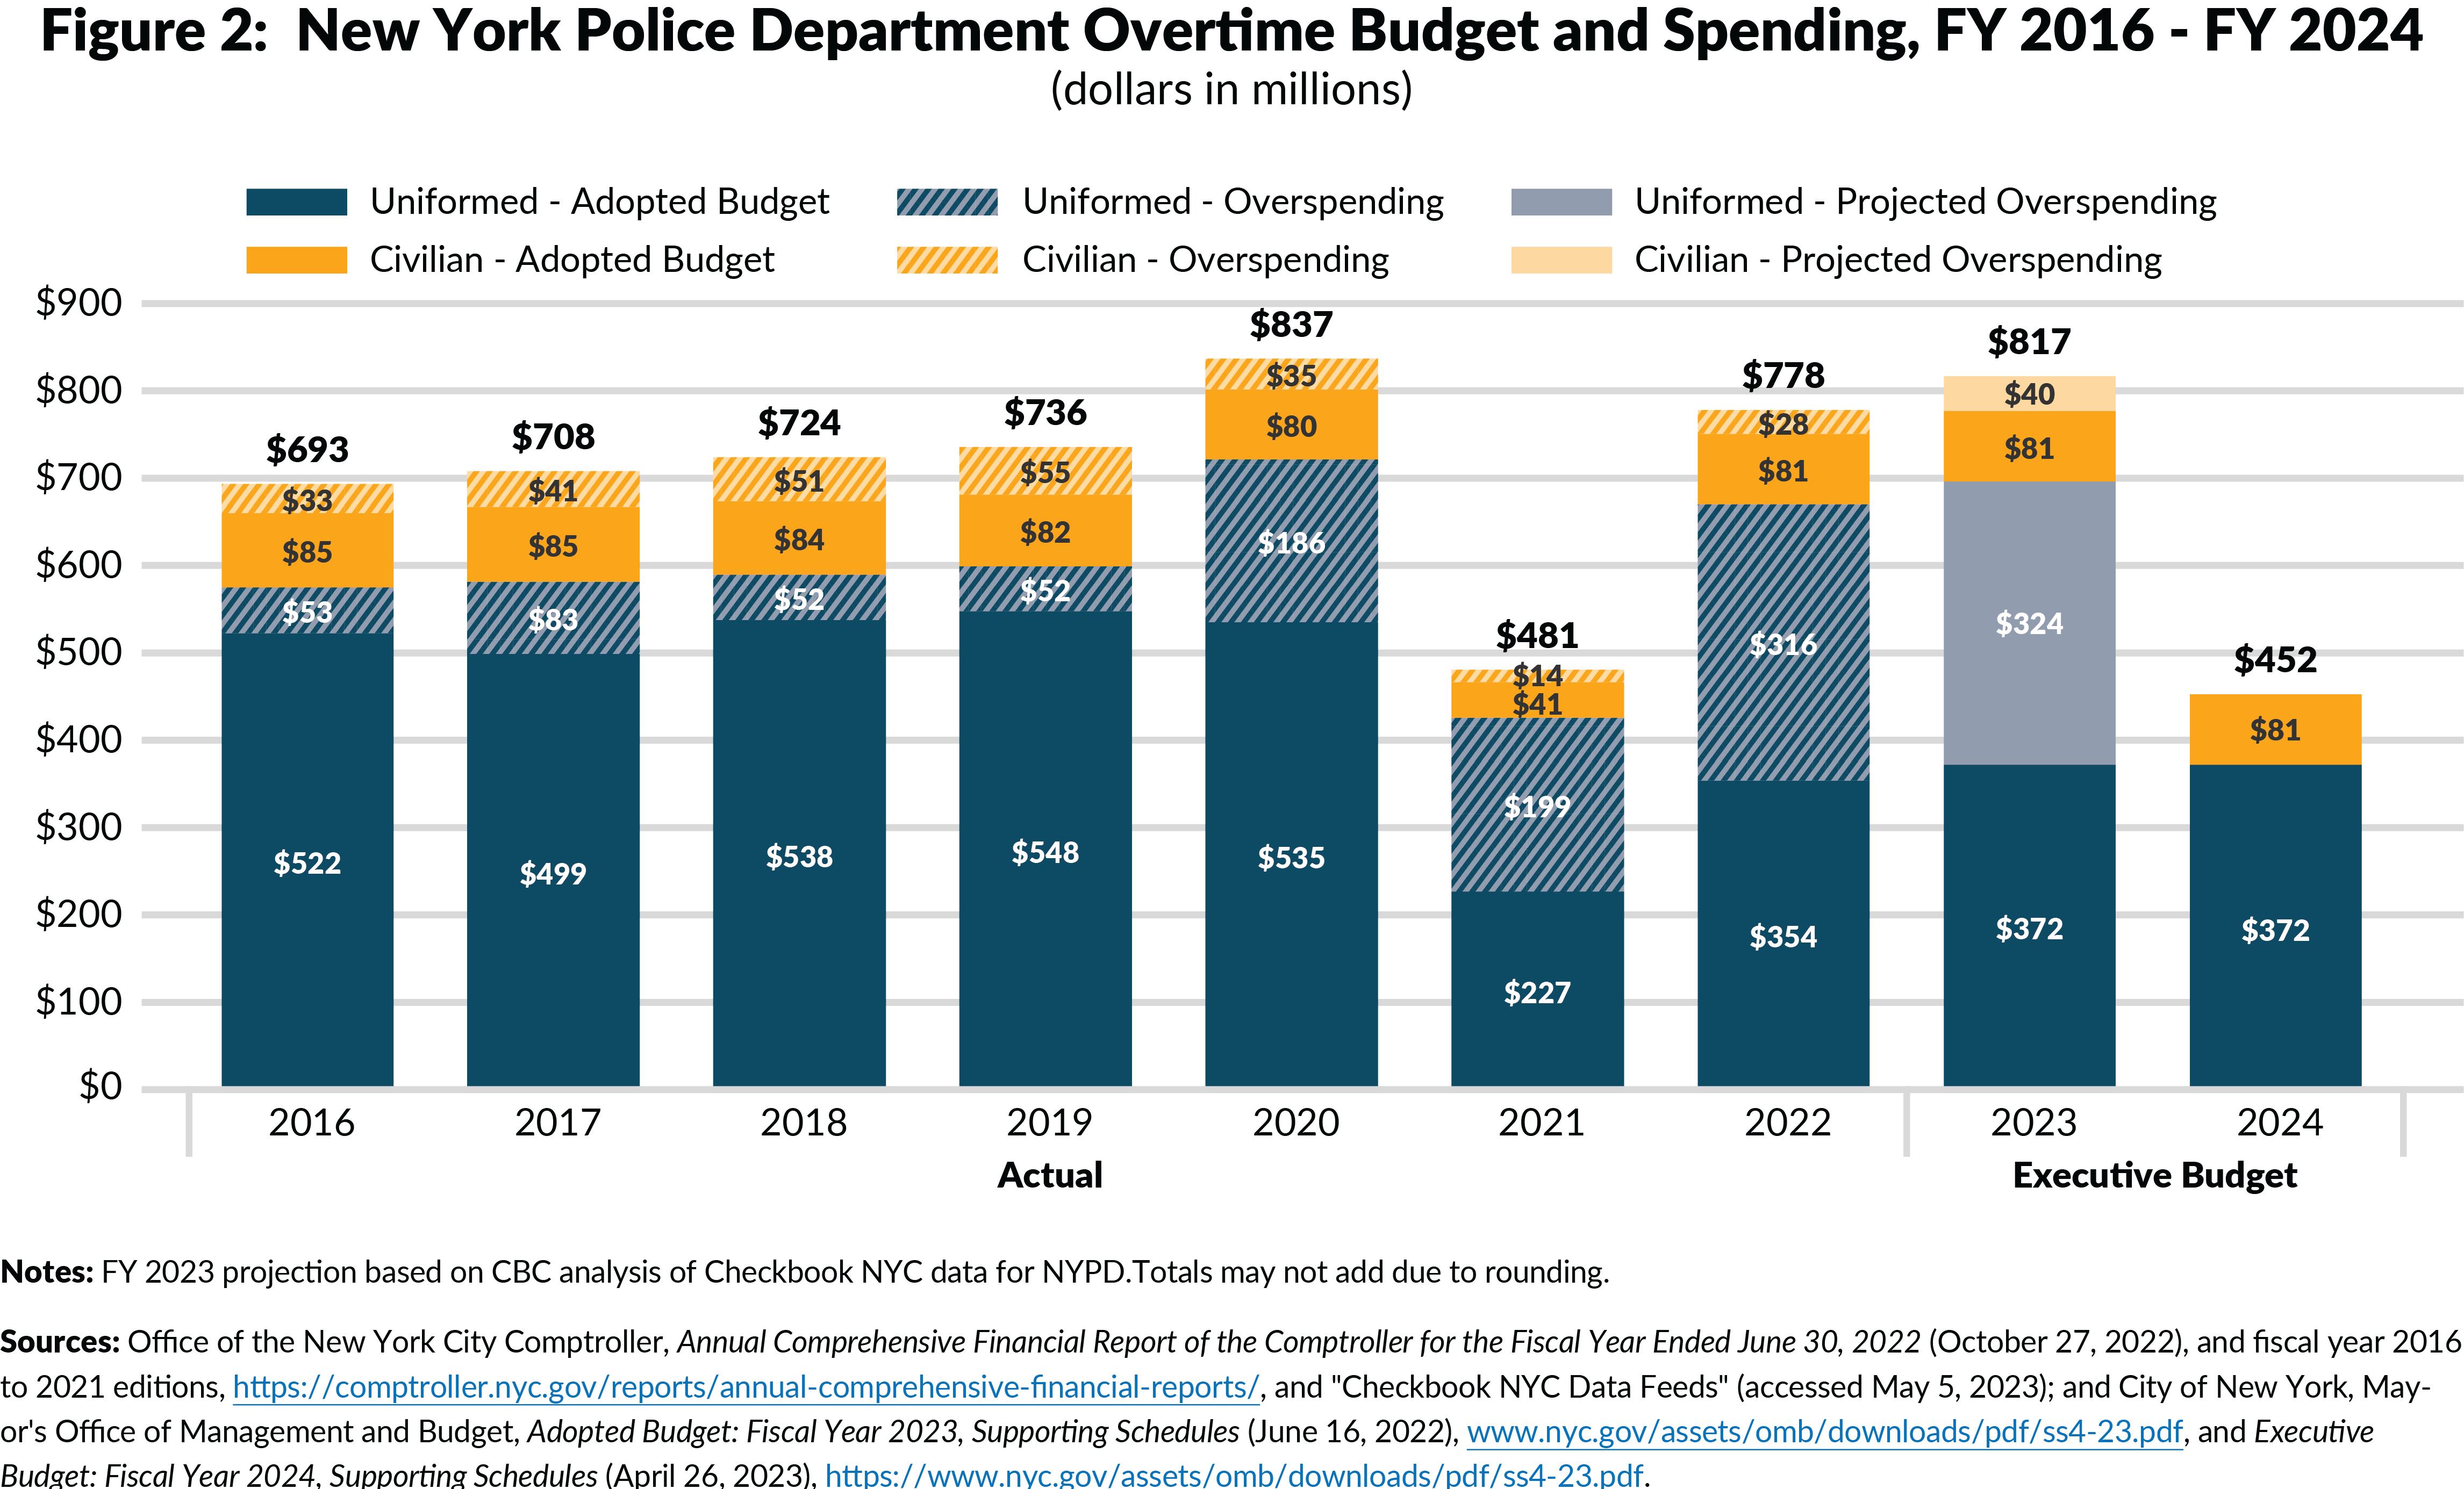 Figure 2:  New York Police Department Overtime Budget and Spending, FY 2016 - FY 2024 (dollars in millions)